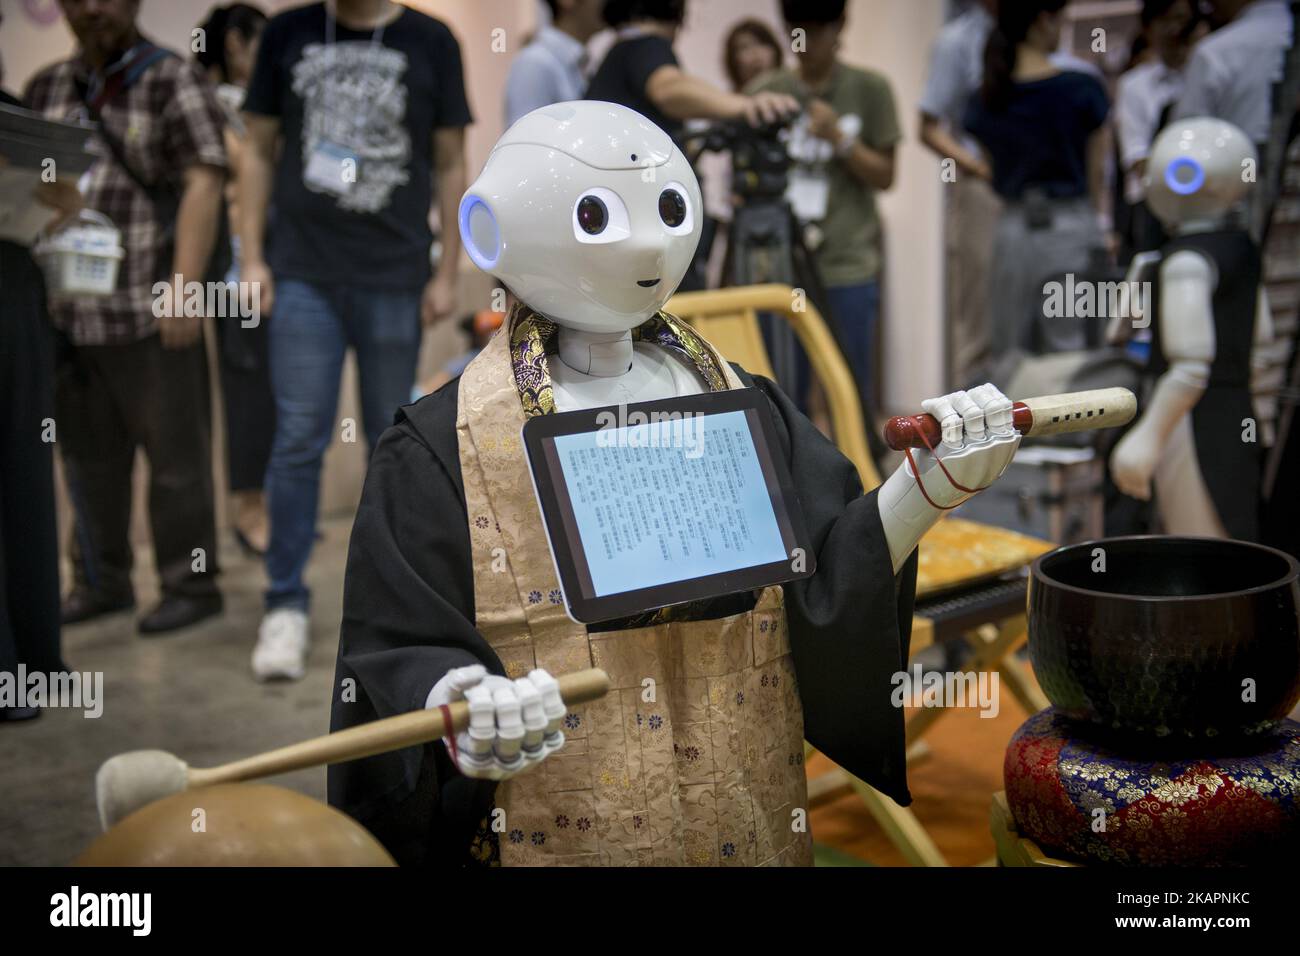 Pepper human-shaped robot while celebrating the Buddhist funeral rites to the Tokyo Int'l Funeral & Cemetery Show in Tokyo, Japan on August 23, 2017. Hundreds of funeral home operators, cemeteries operators, crematorium operators, traders, suppliers, buyers, professional associations and investors gather at this professional funeral event. (Photo by Alessandro Di Ciommo/NurPhoto) Stock Photo